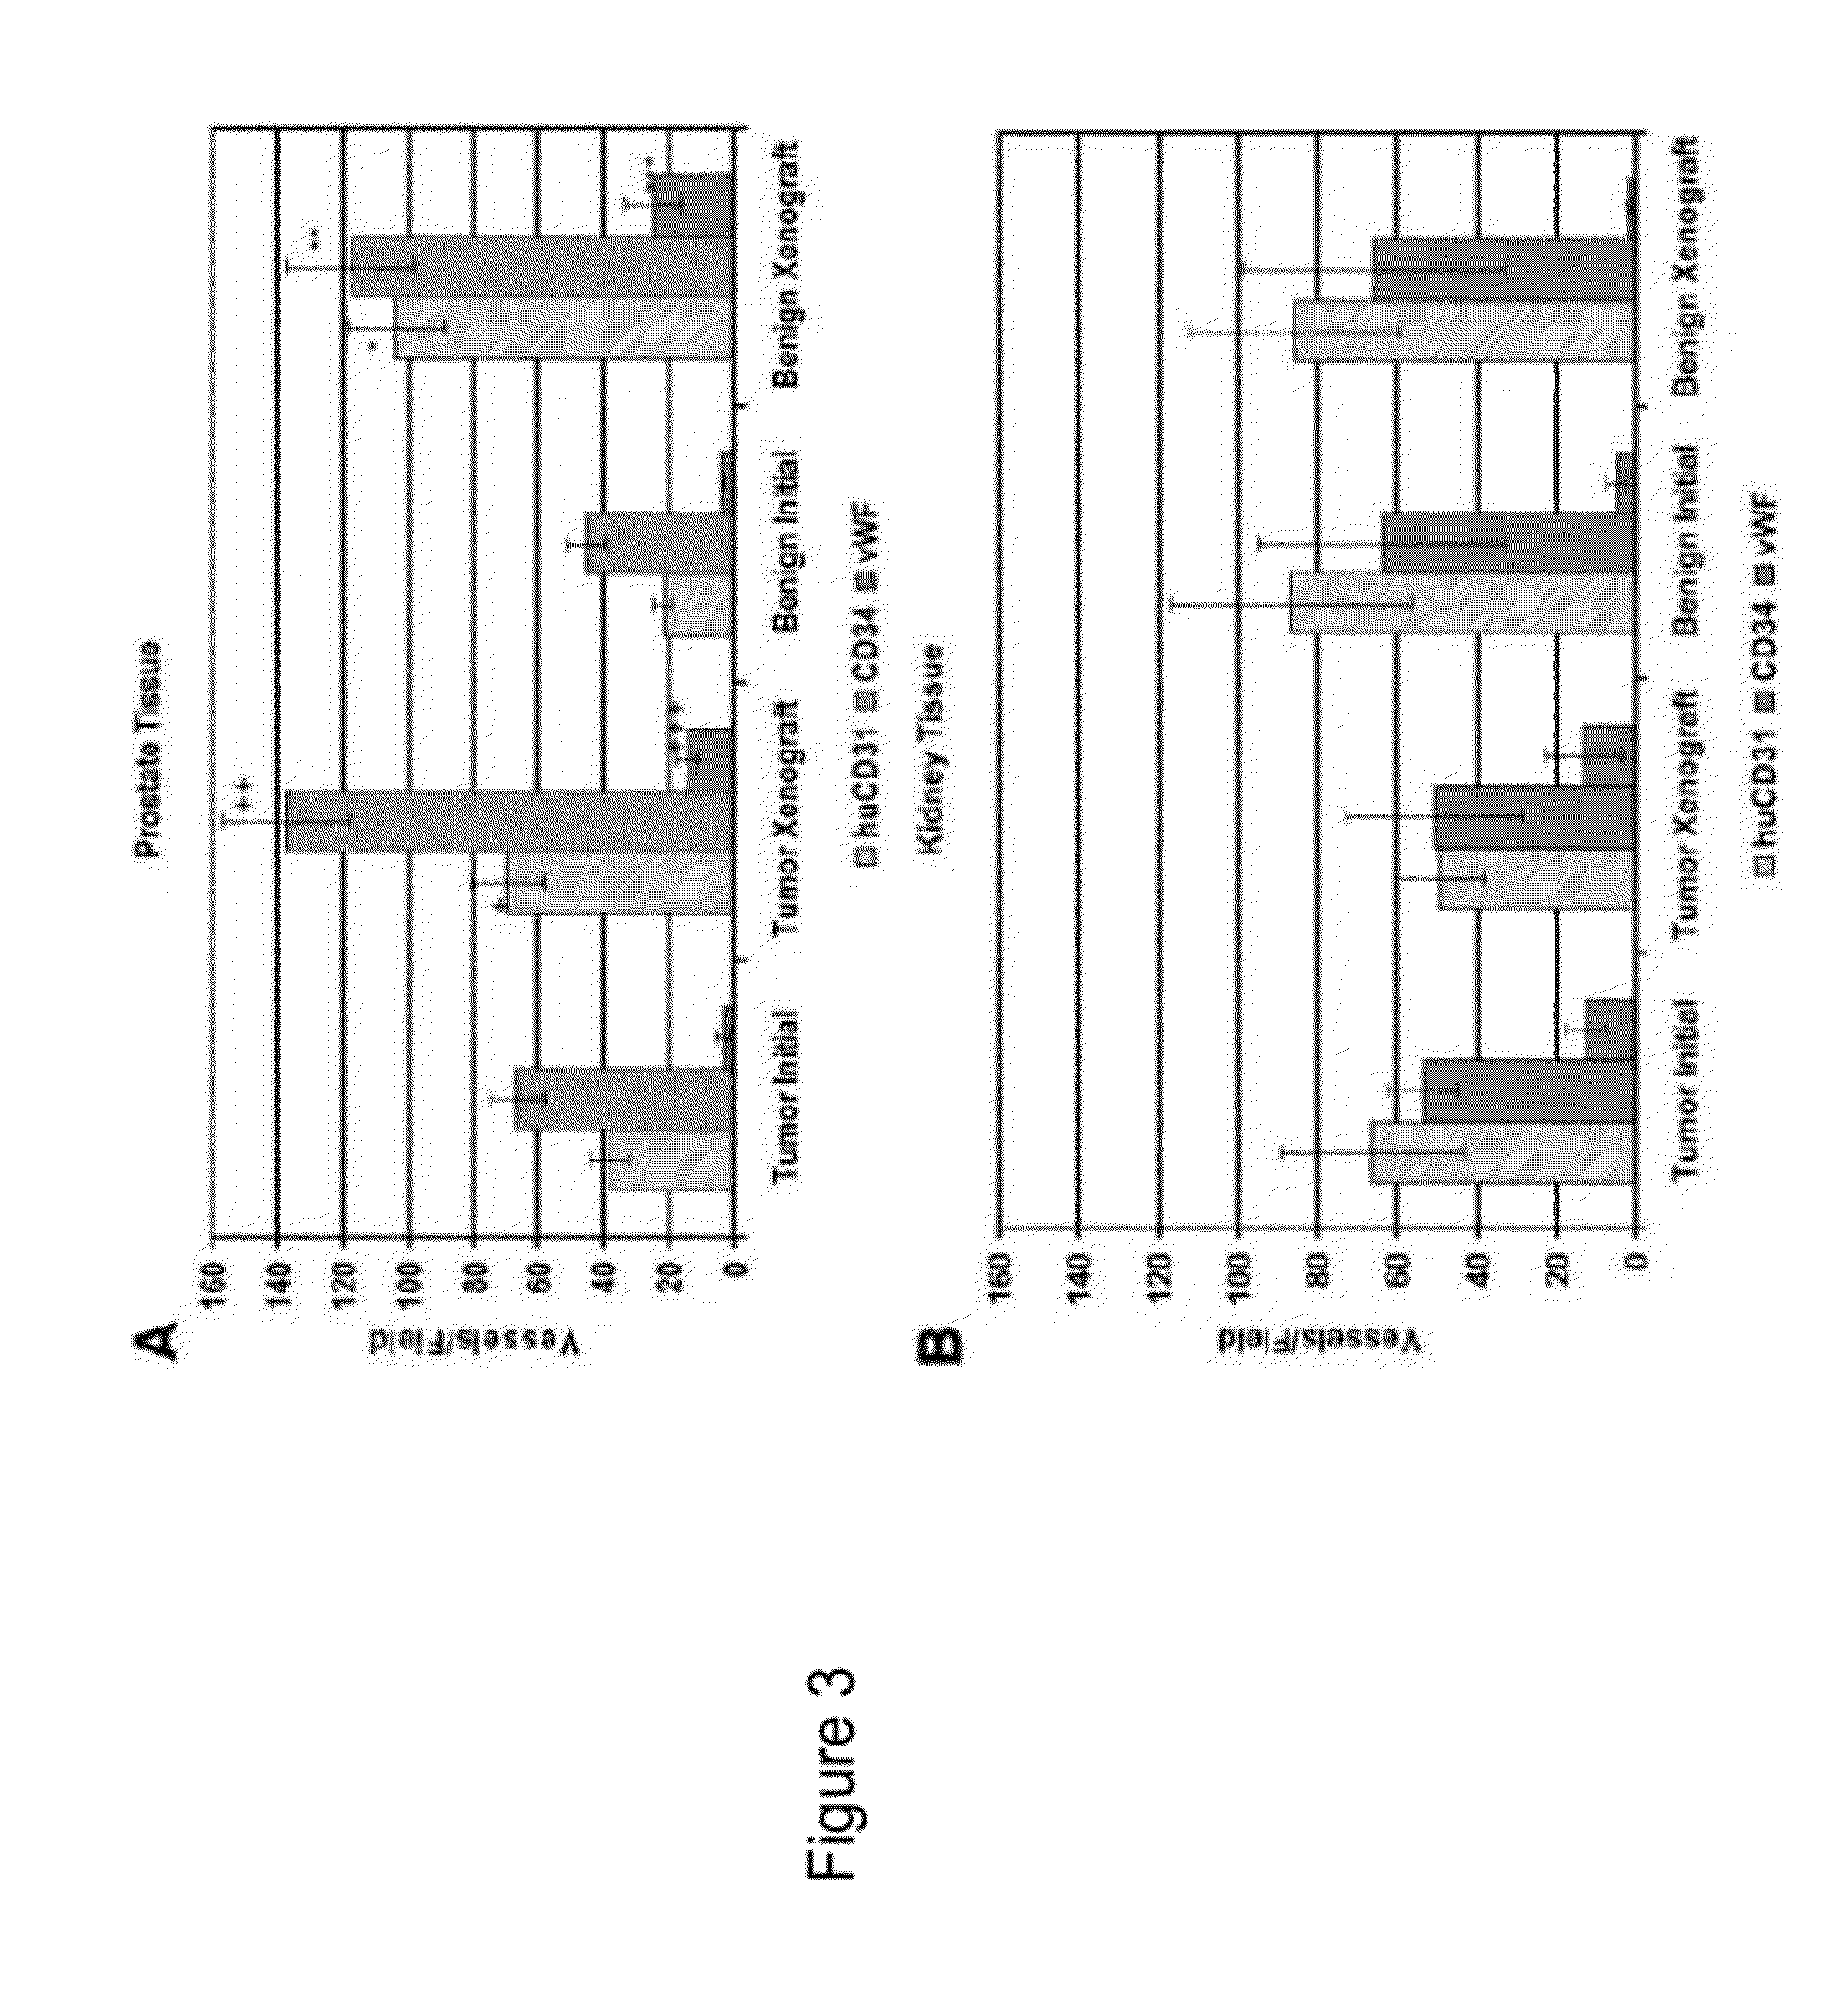 Methods For Evaluating and Implementing Prostate Disease Treatments